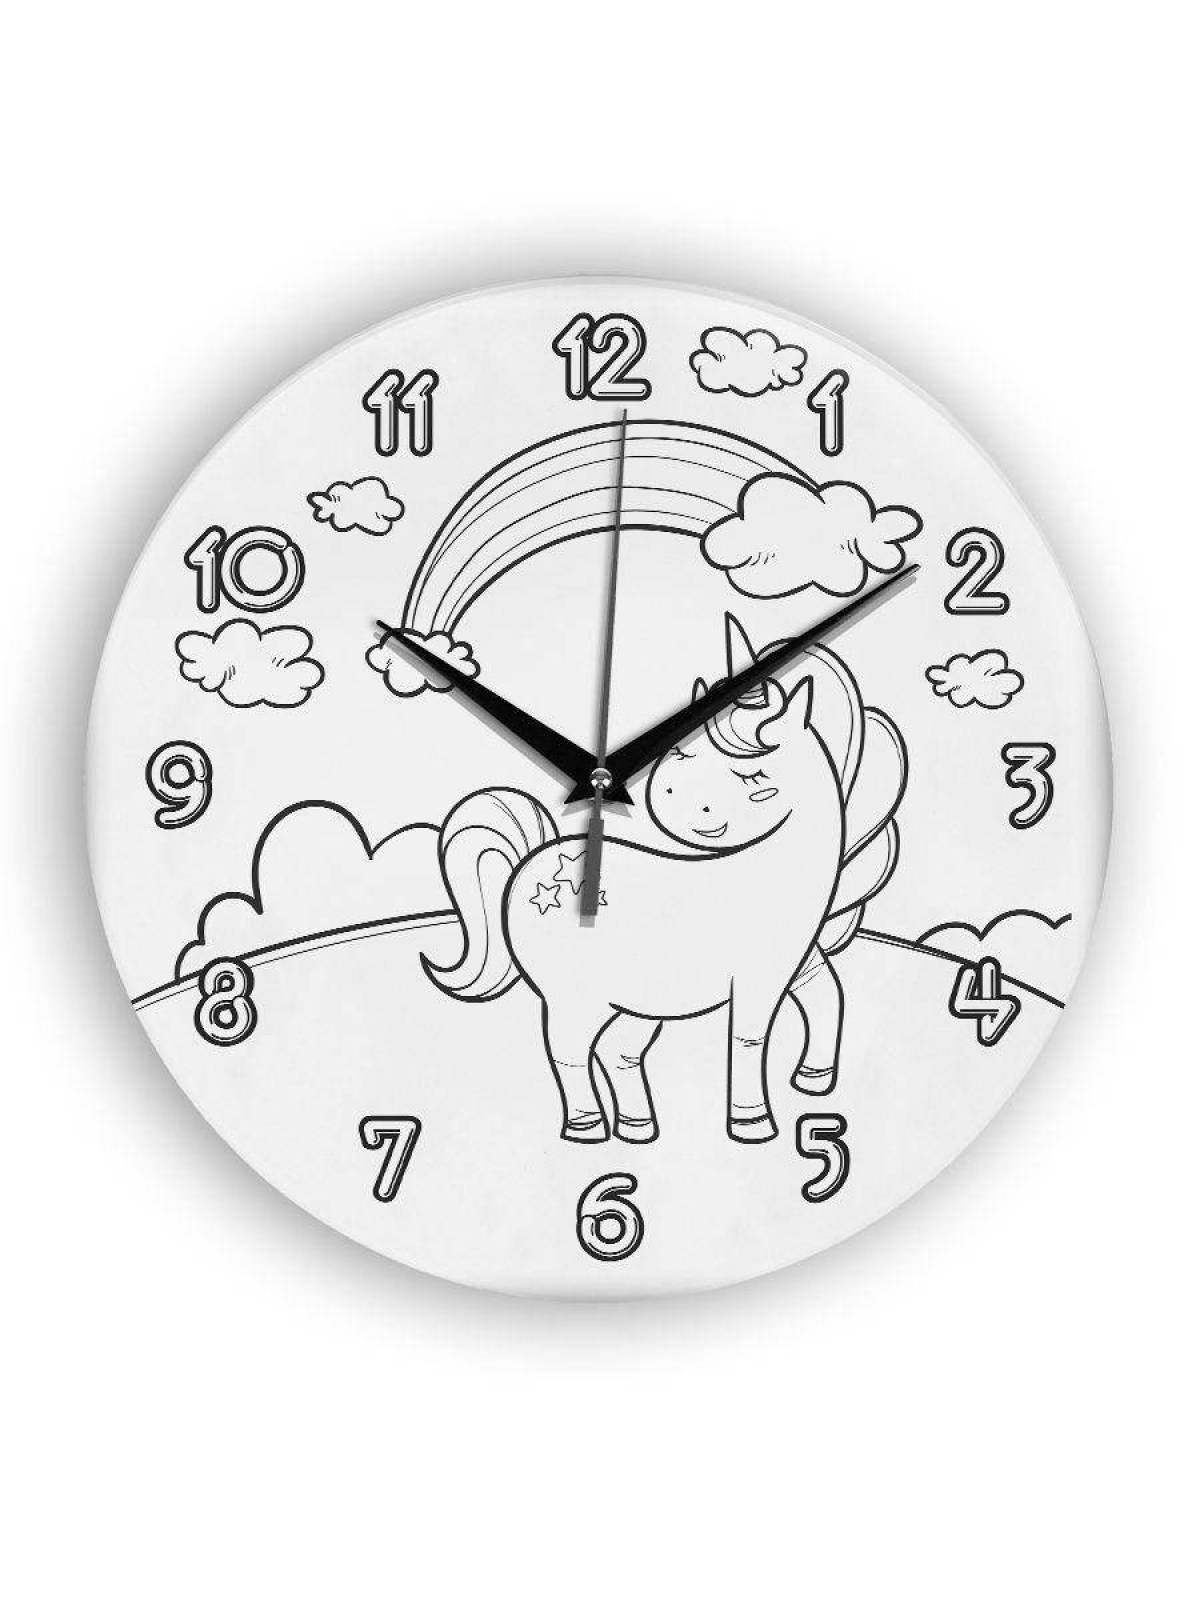 Playful wall clock coloring page